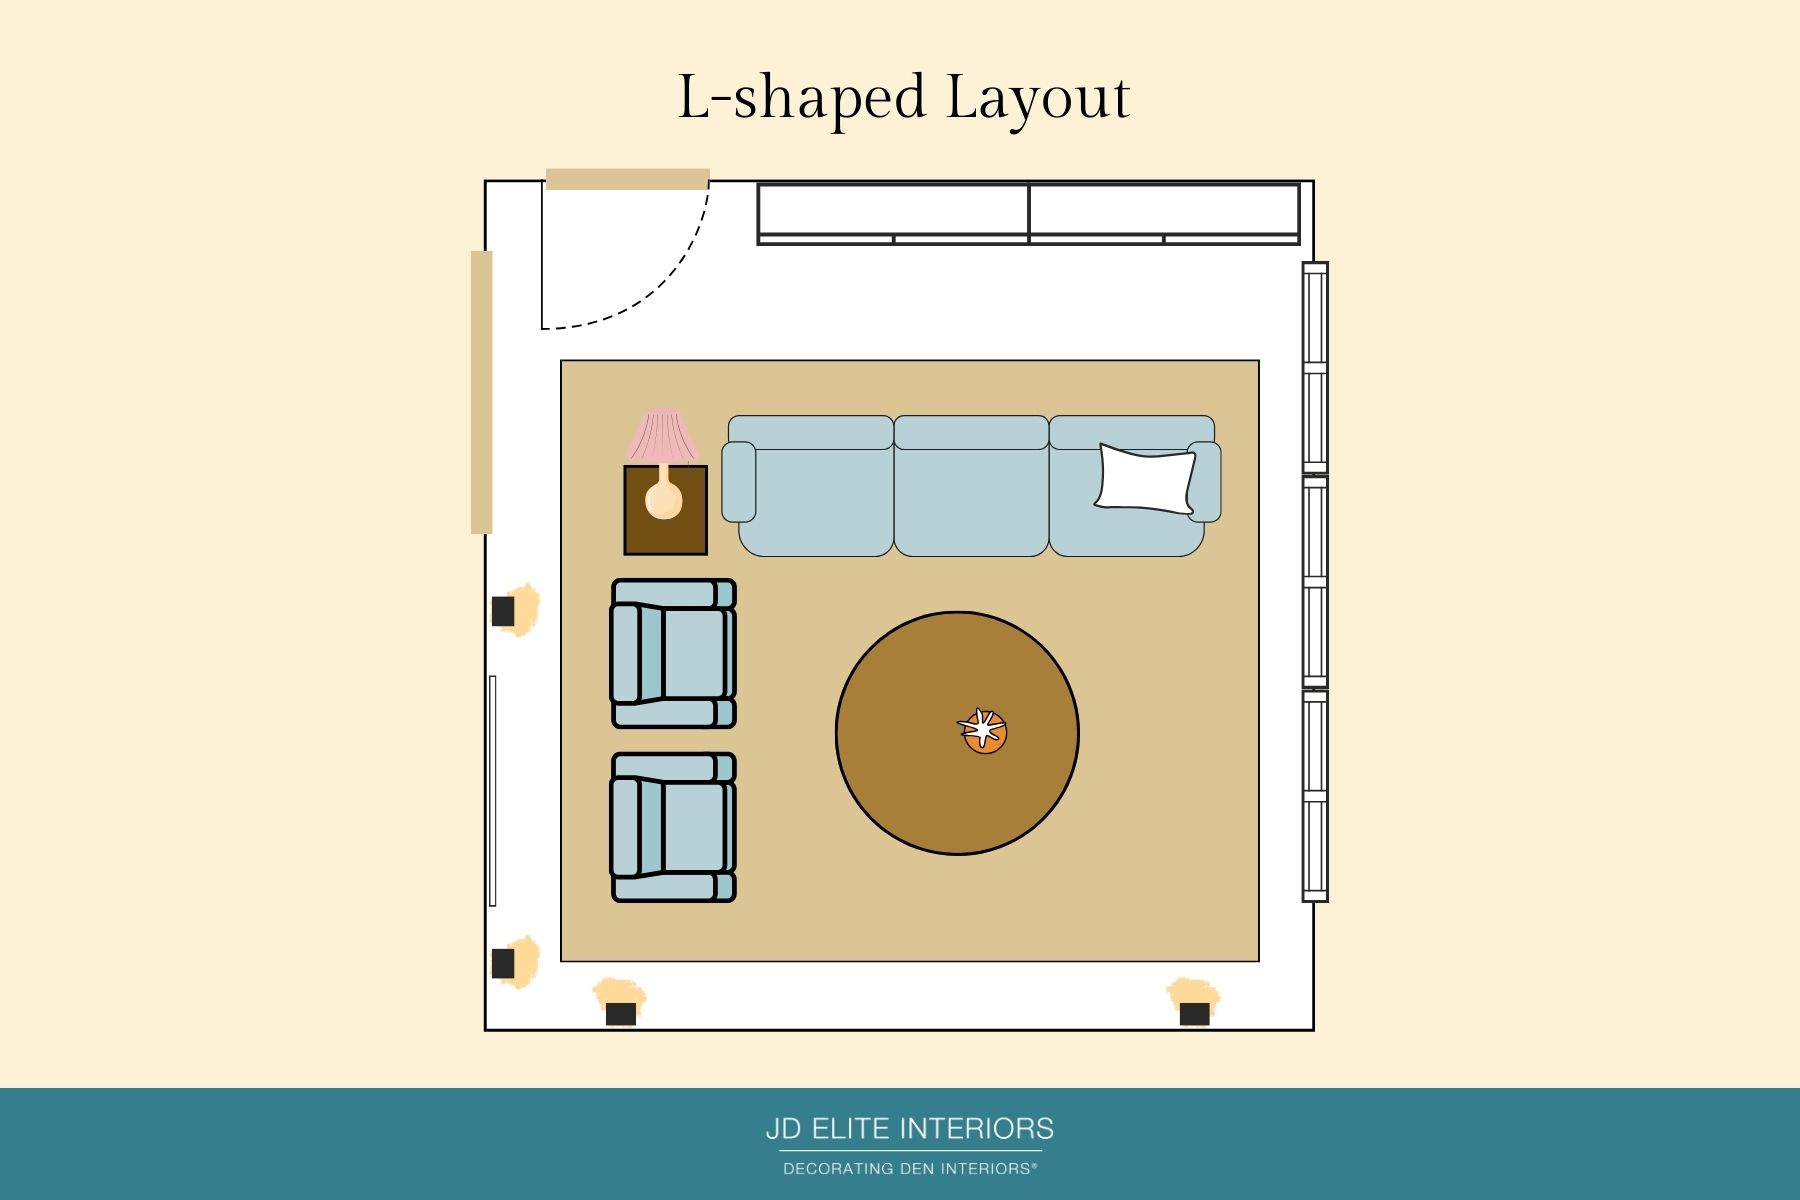 L-shaped furniture design layout for a living room with couches, chairs, and end table